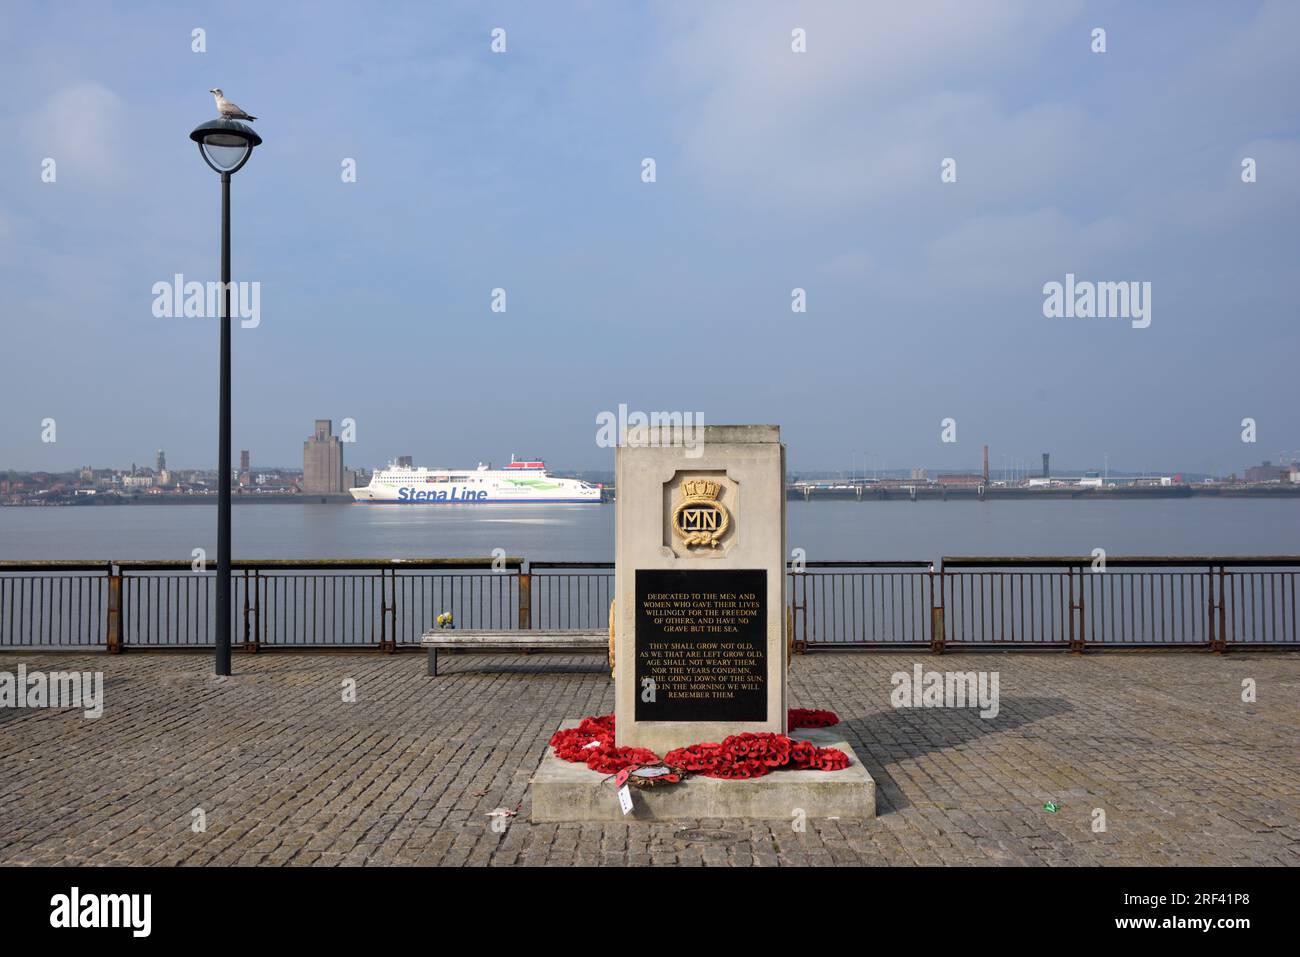 The Liverpool Naval Memorial (1952) or Second World War Memorial on the Pier Head, Waterfront or Quay of River Mersey Liverpool UK Stock Photo